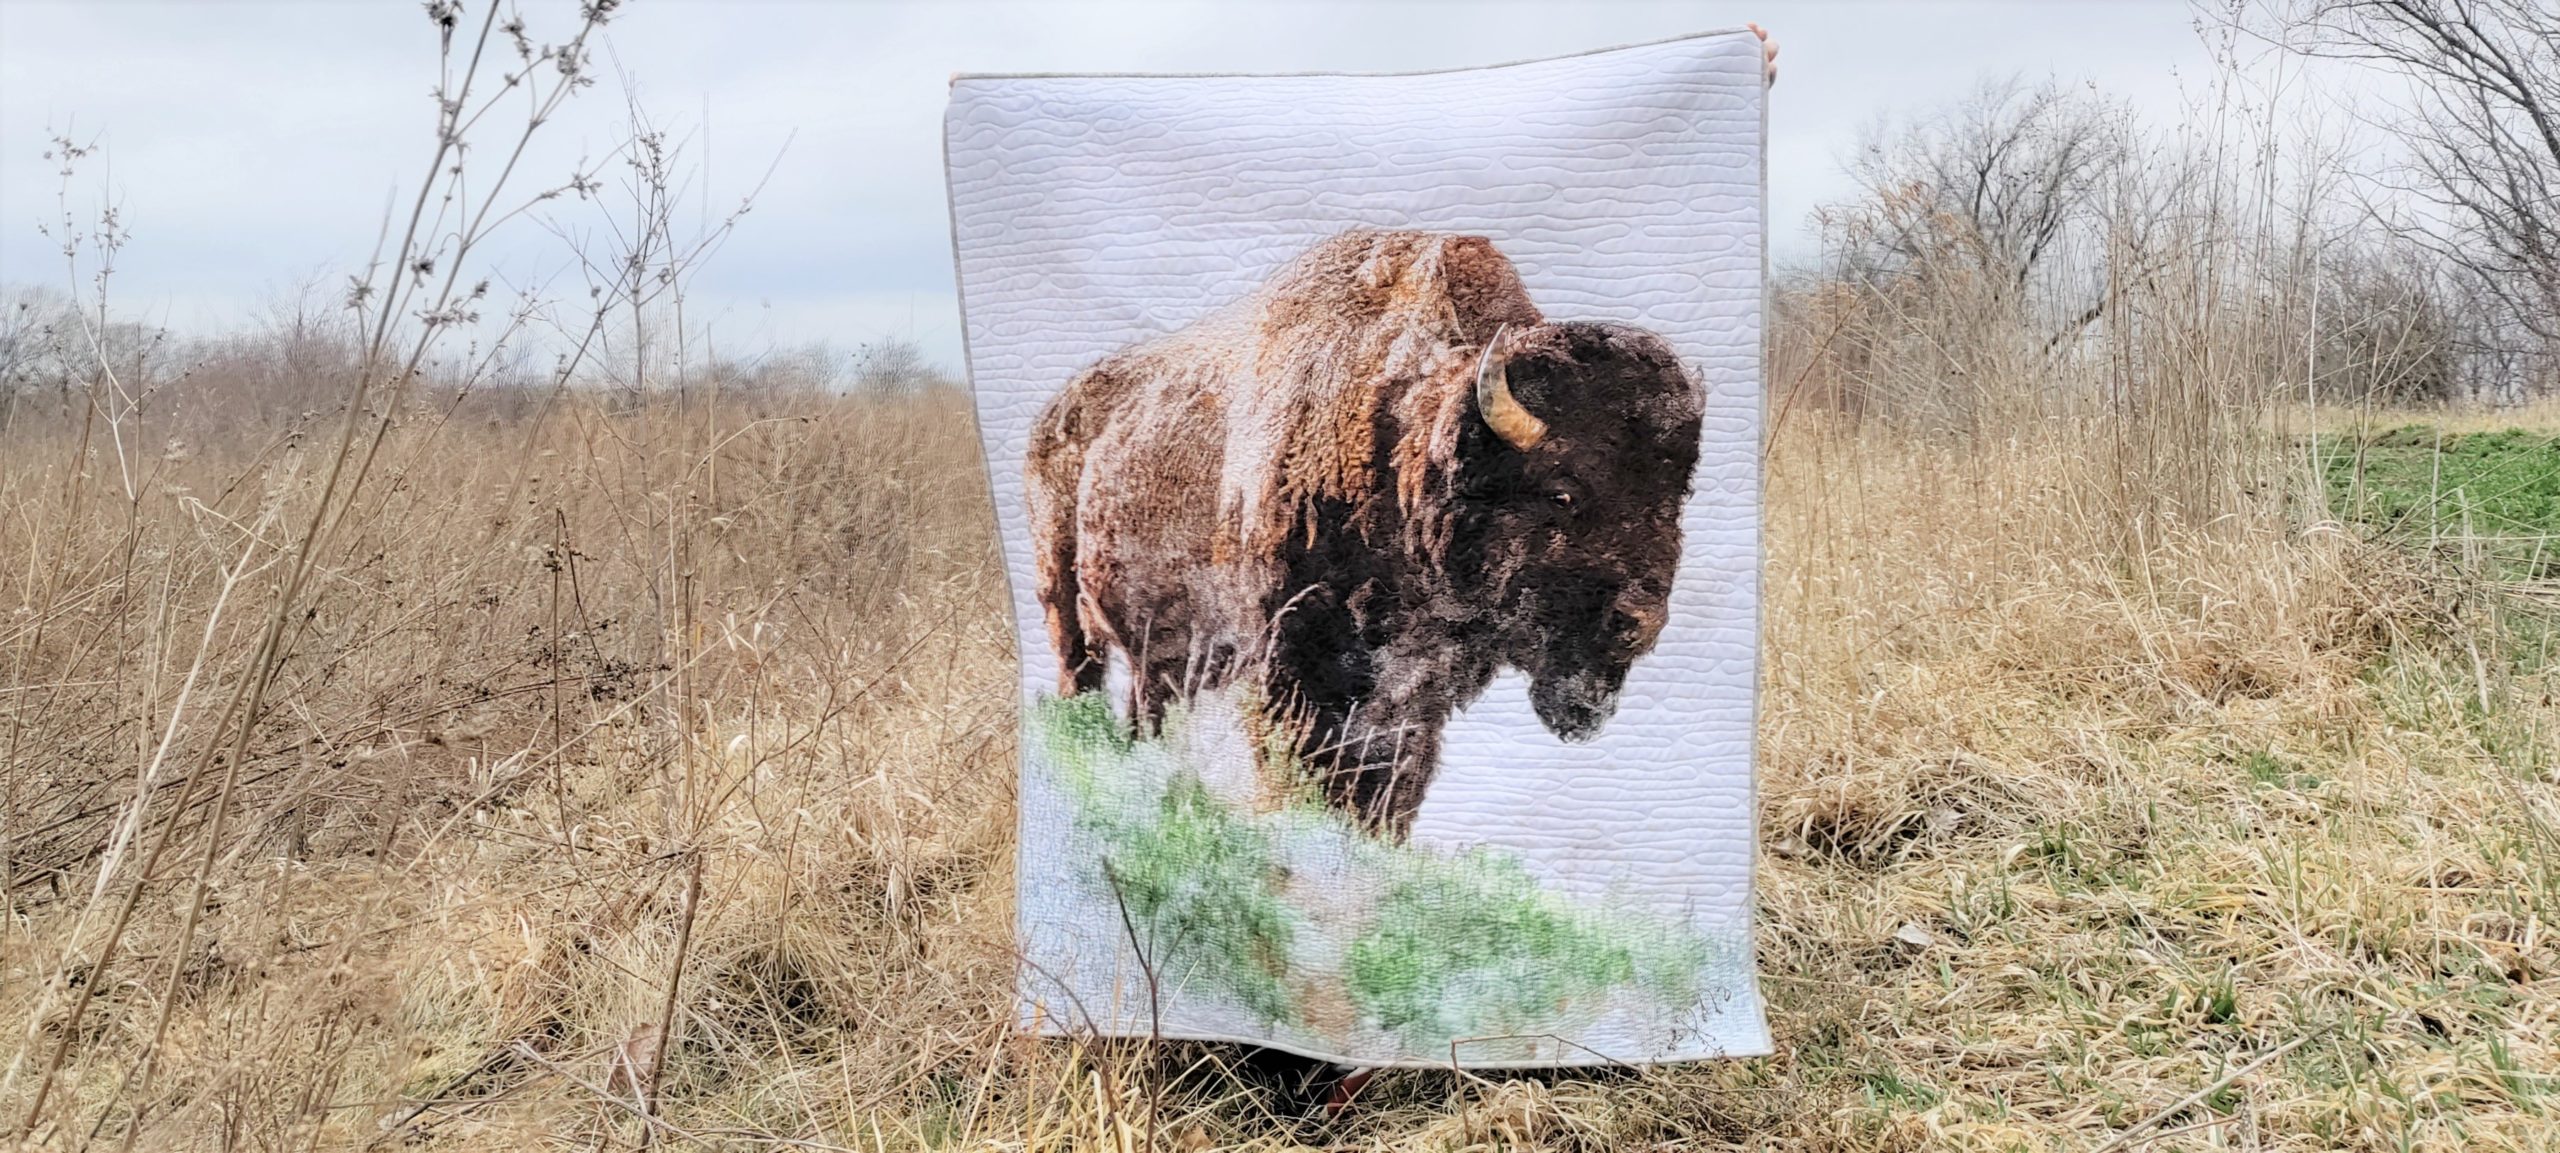 Nature's Window Buffalo panel free-motion quilted being held by a young boy in a field of brown grass